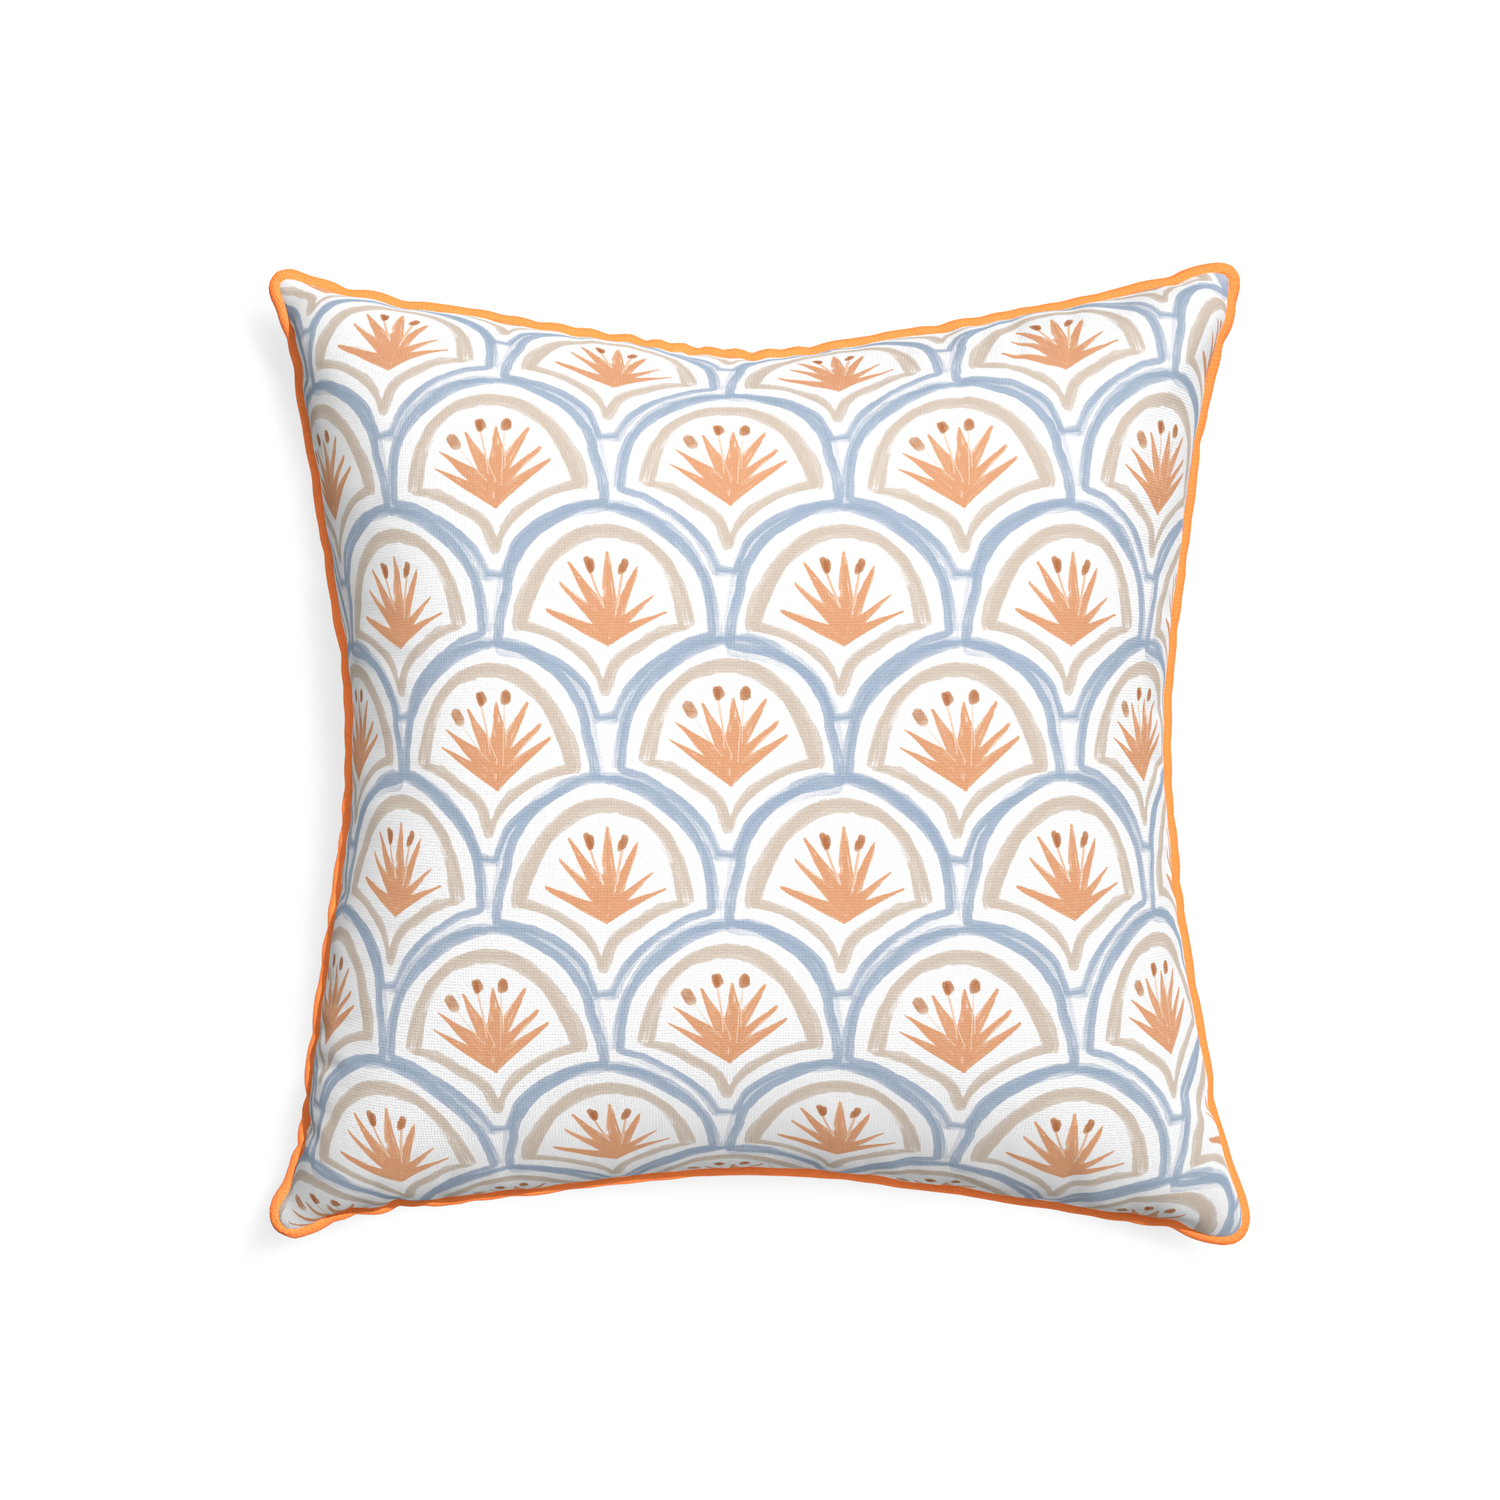 22-square thatcher apricot custom art deco palm patternpillow with clementine piping on white background